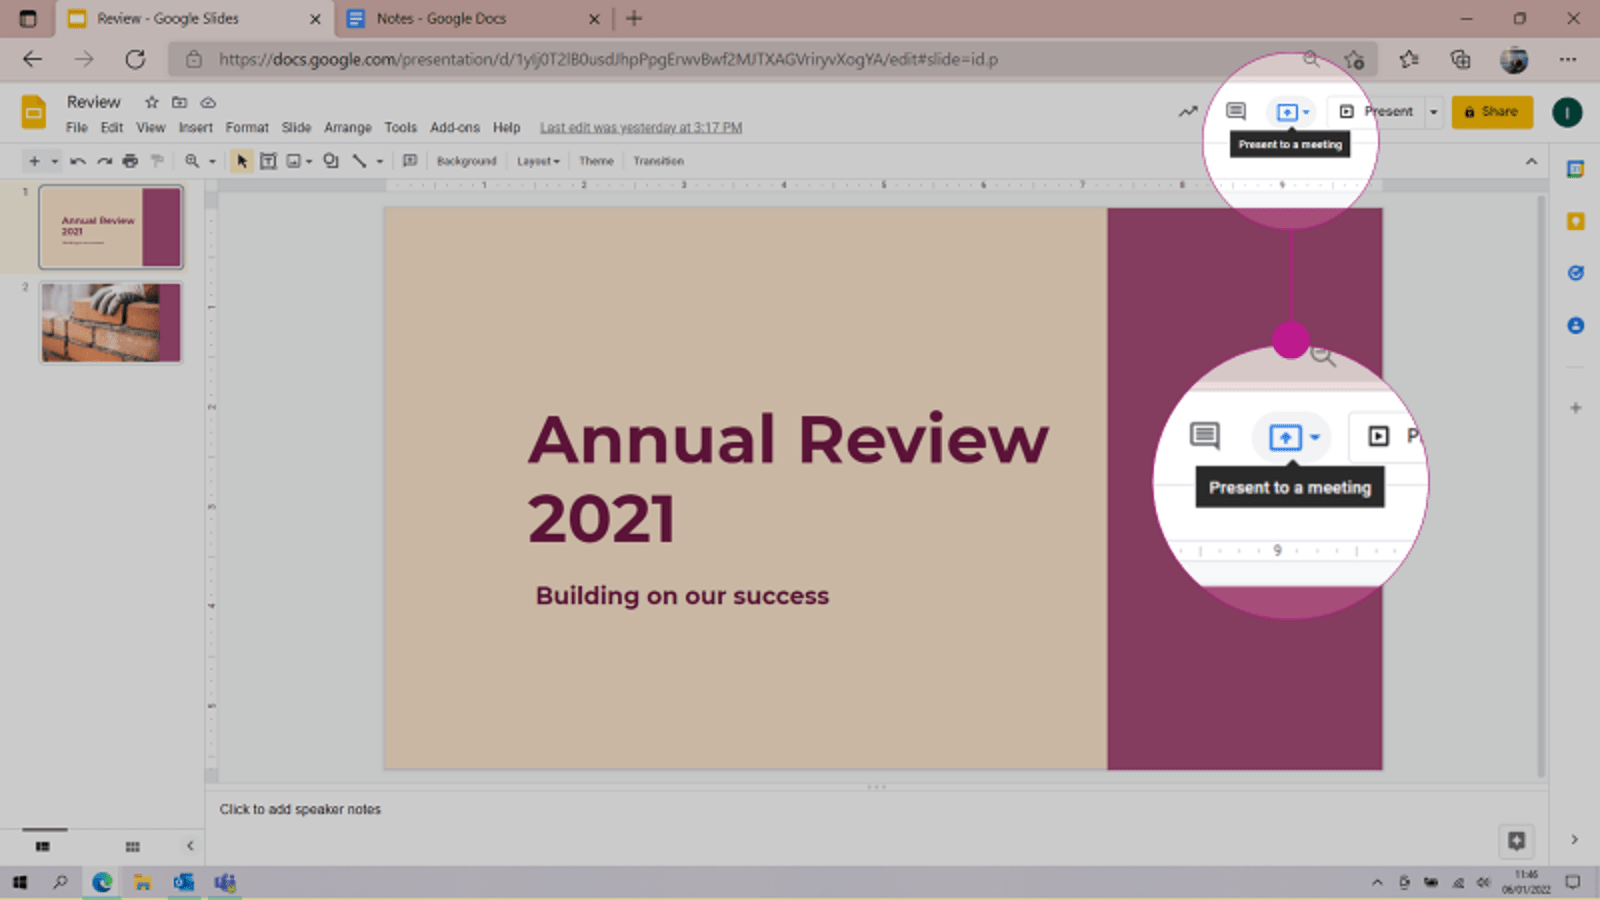 Screenshot of Google Slides presentation with 'Present to a meeting' button highlighted.